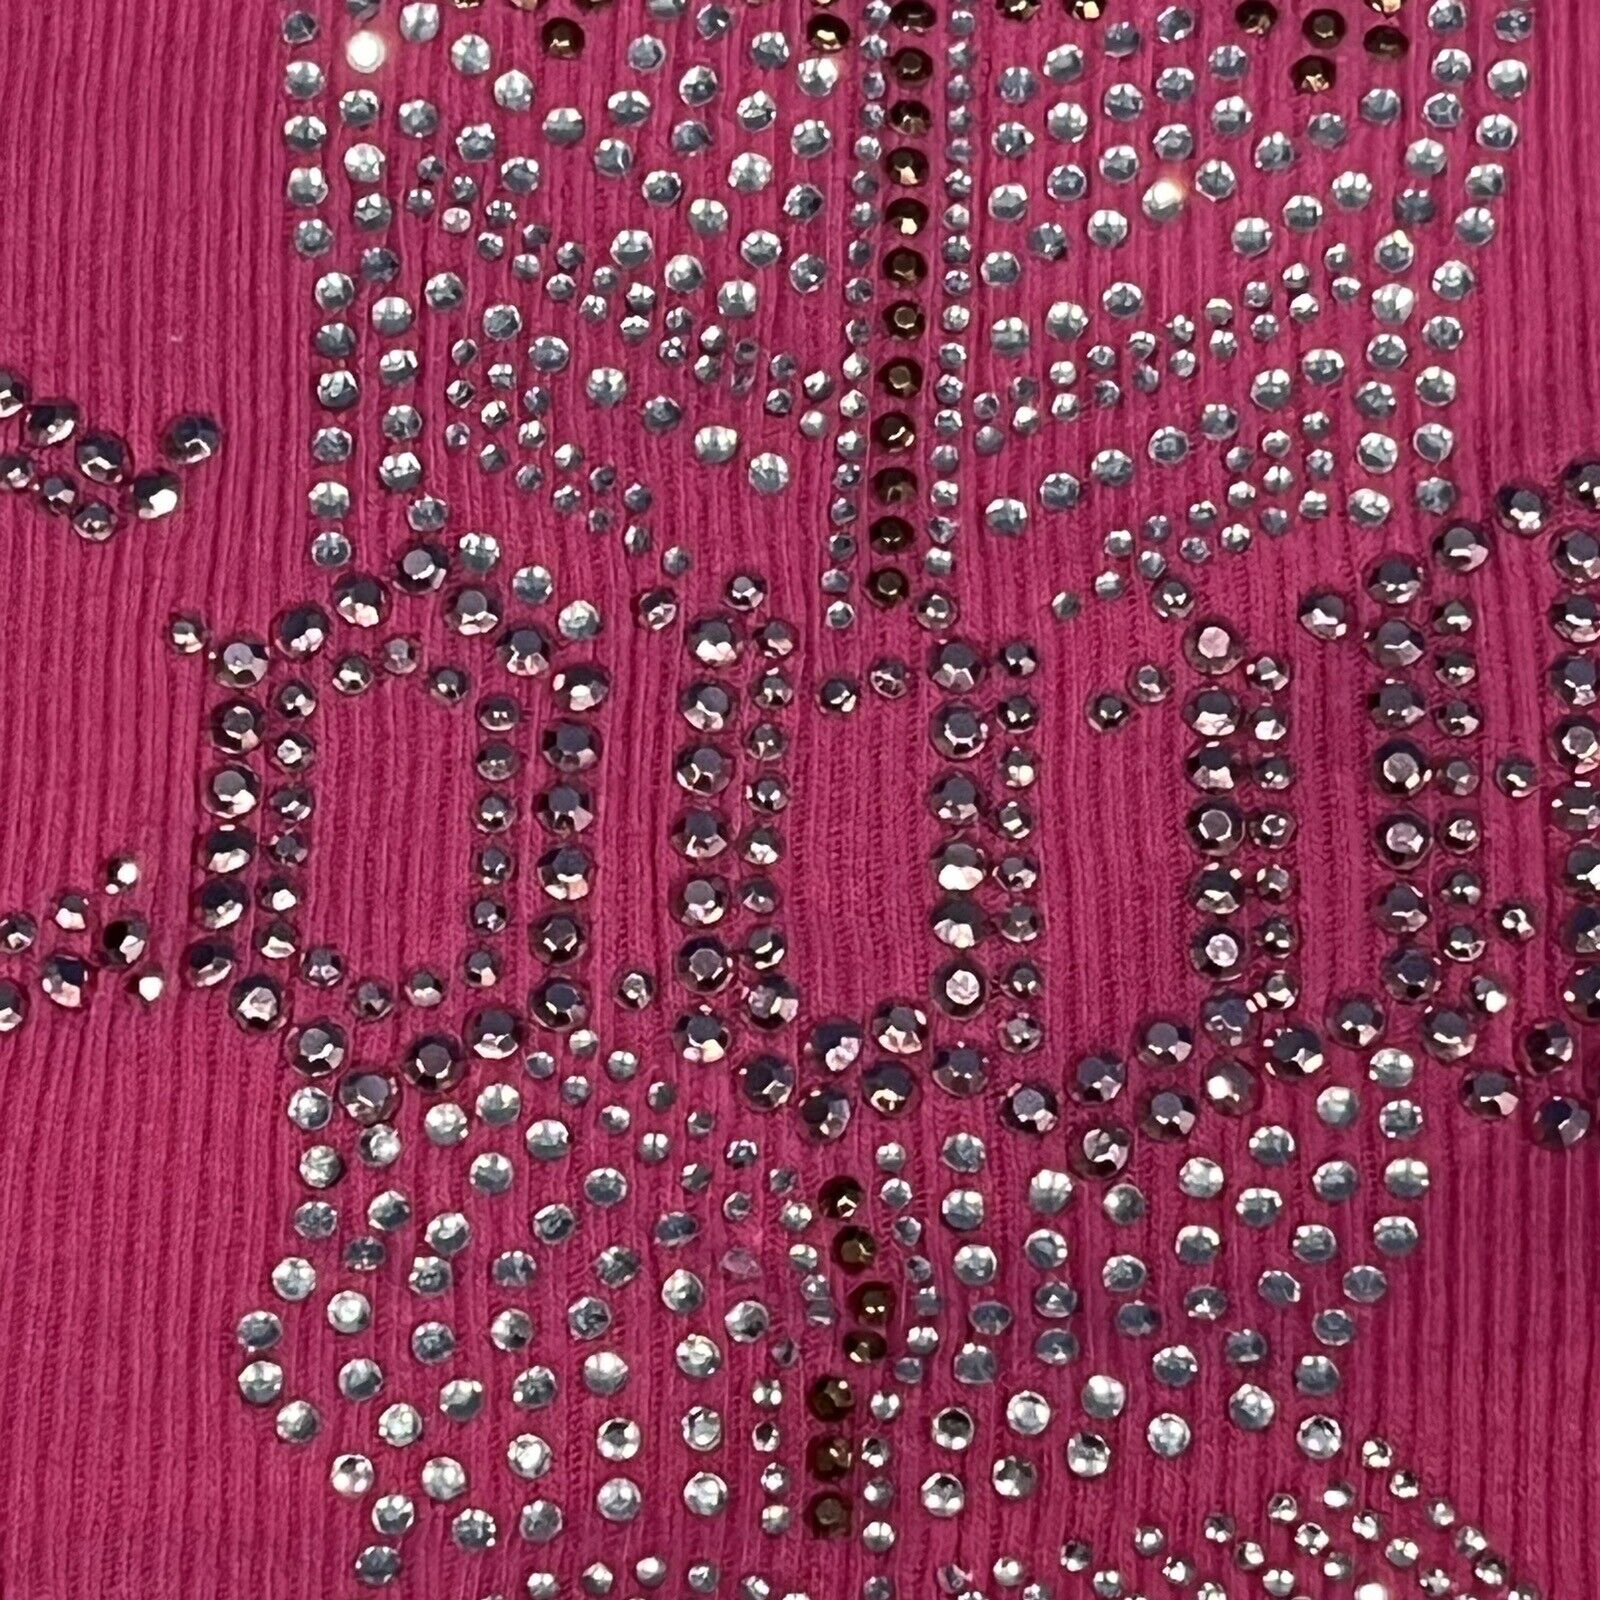 Blinged Rhinestone Pink Cowgirl Boot Tank Top Cowgirl Attitude Junior Large